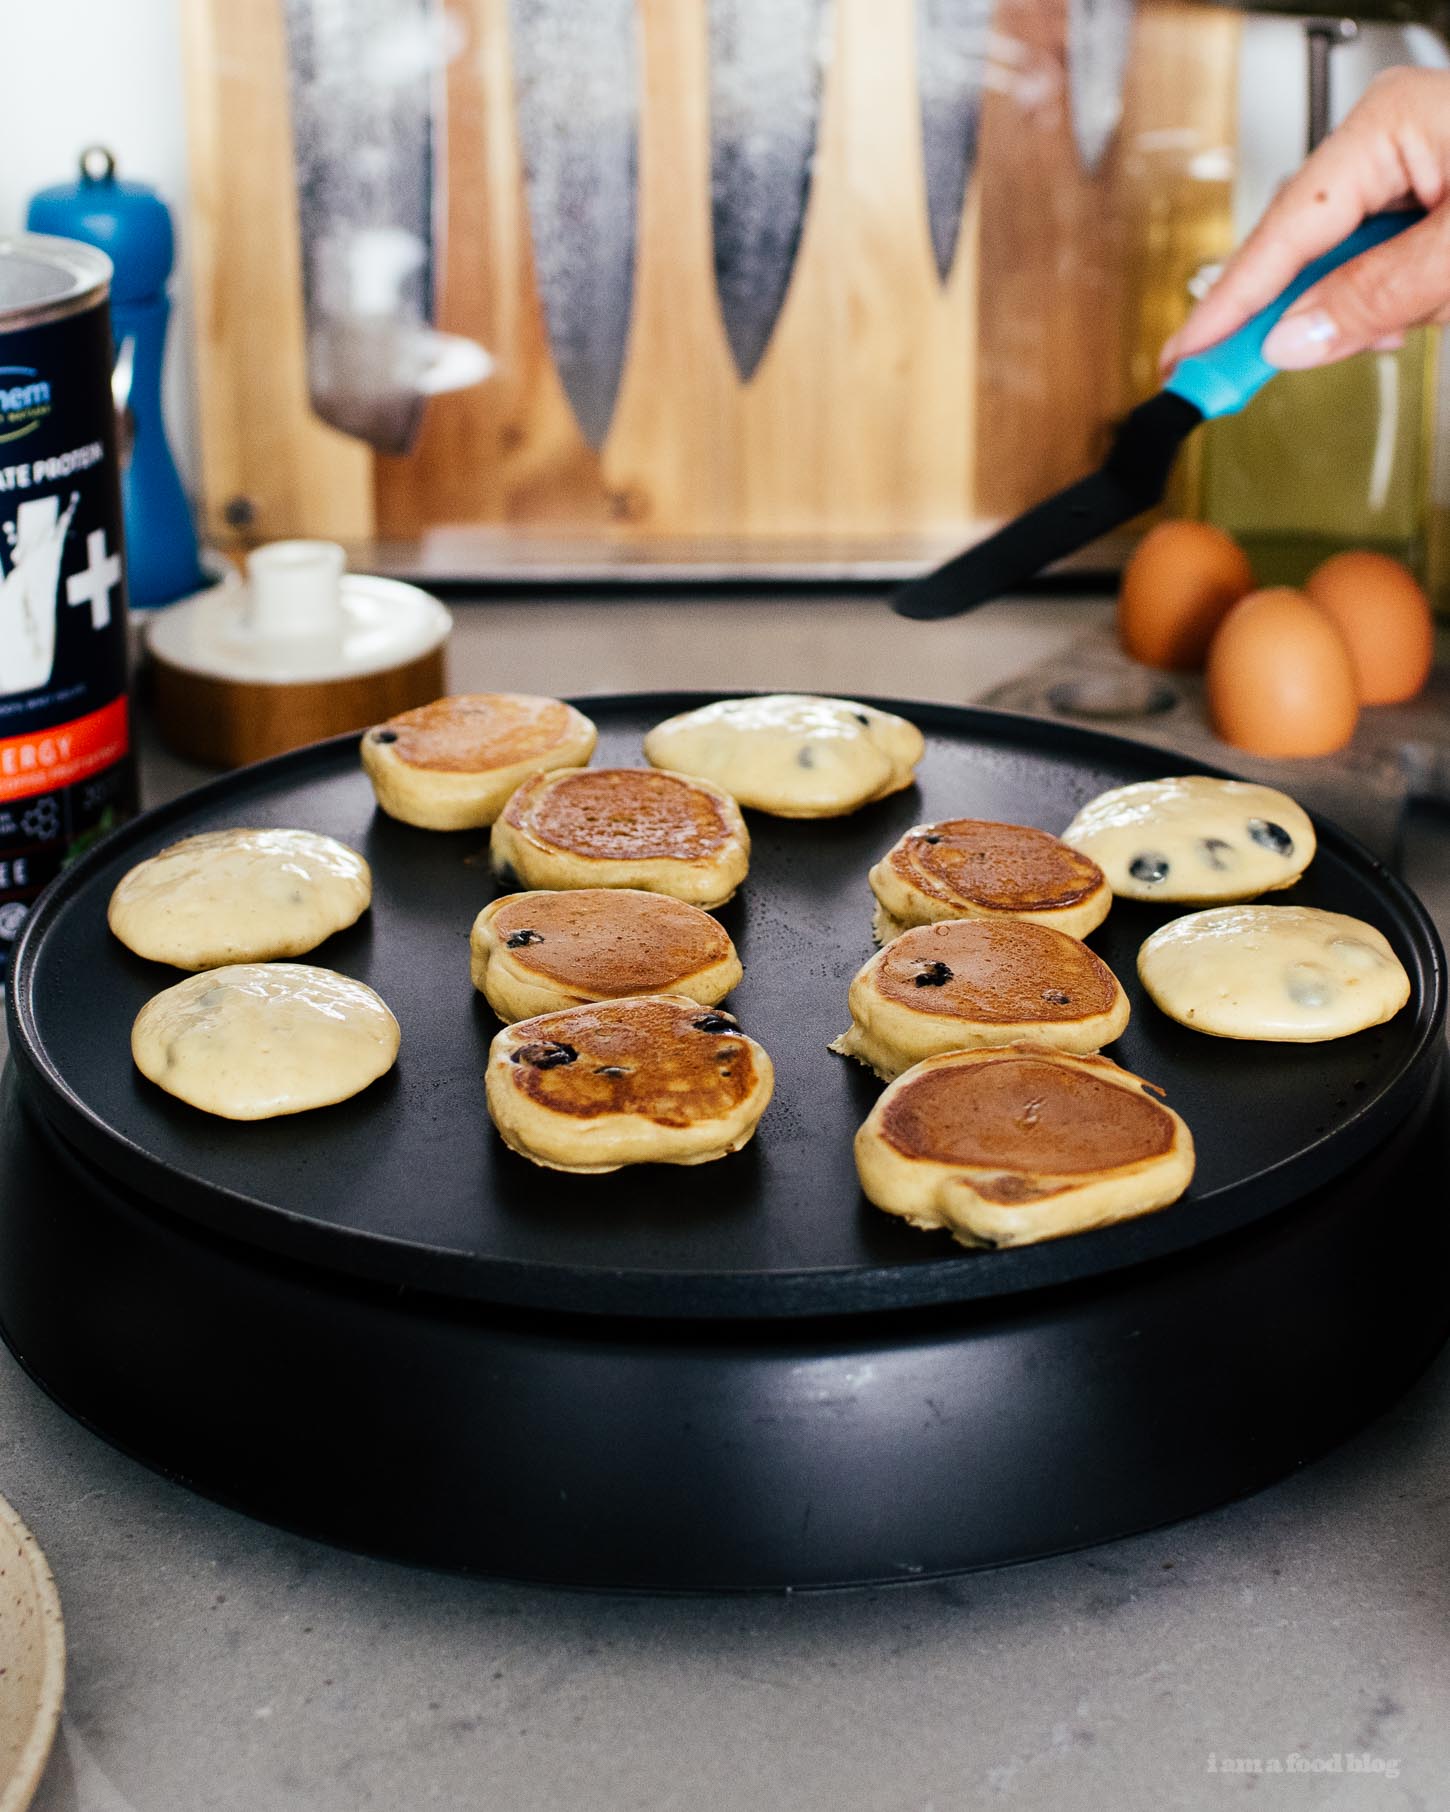 Protein Packed Mini Blueberry Espresso Pancakes | www.iamafoodblog.com